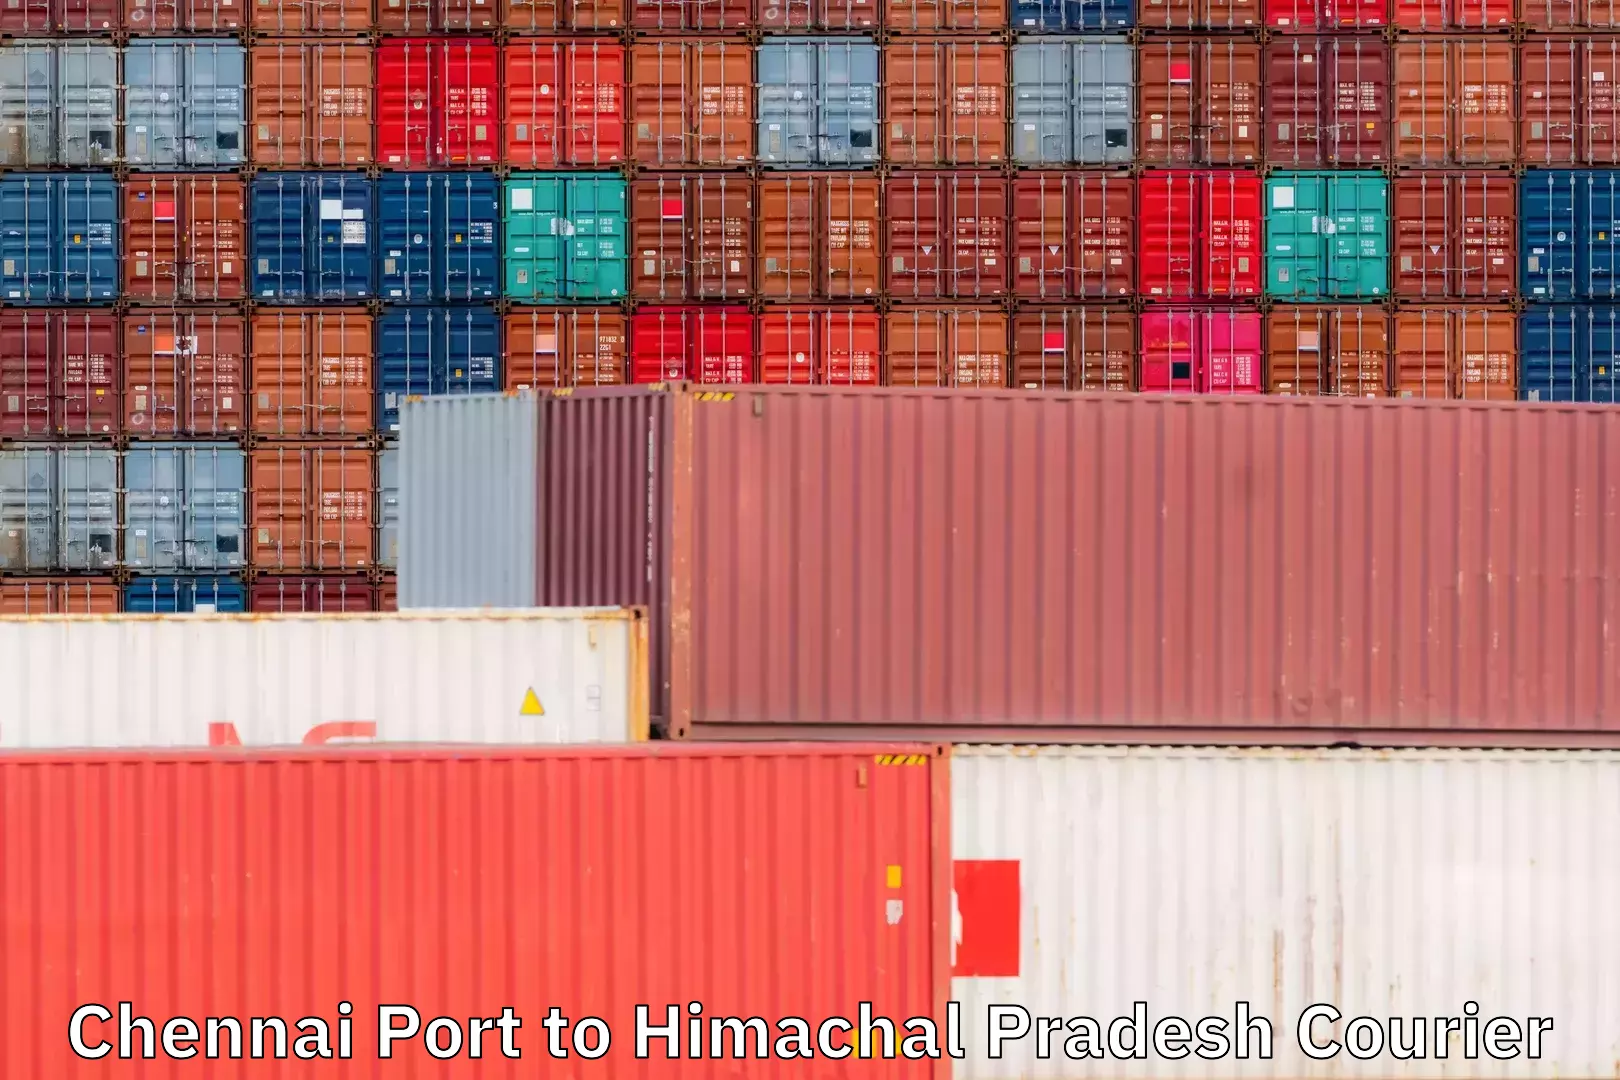 Express delivery solutions Chennai Port to Himachal Pradesh